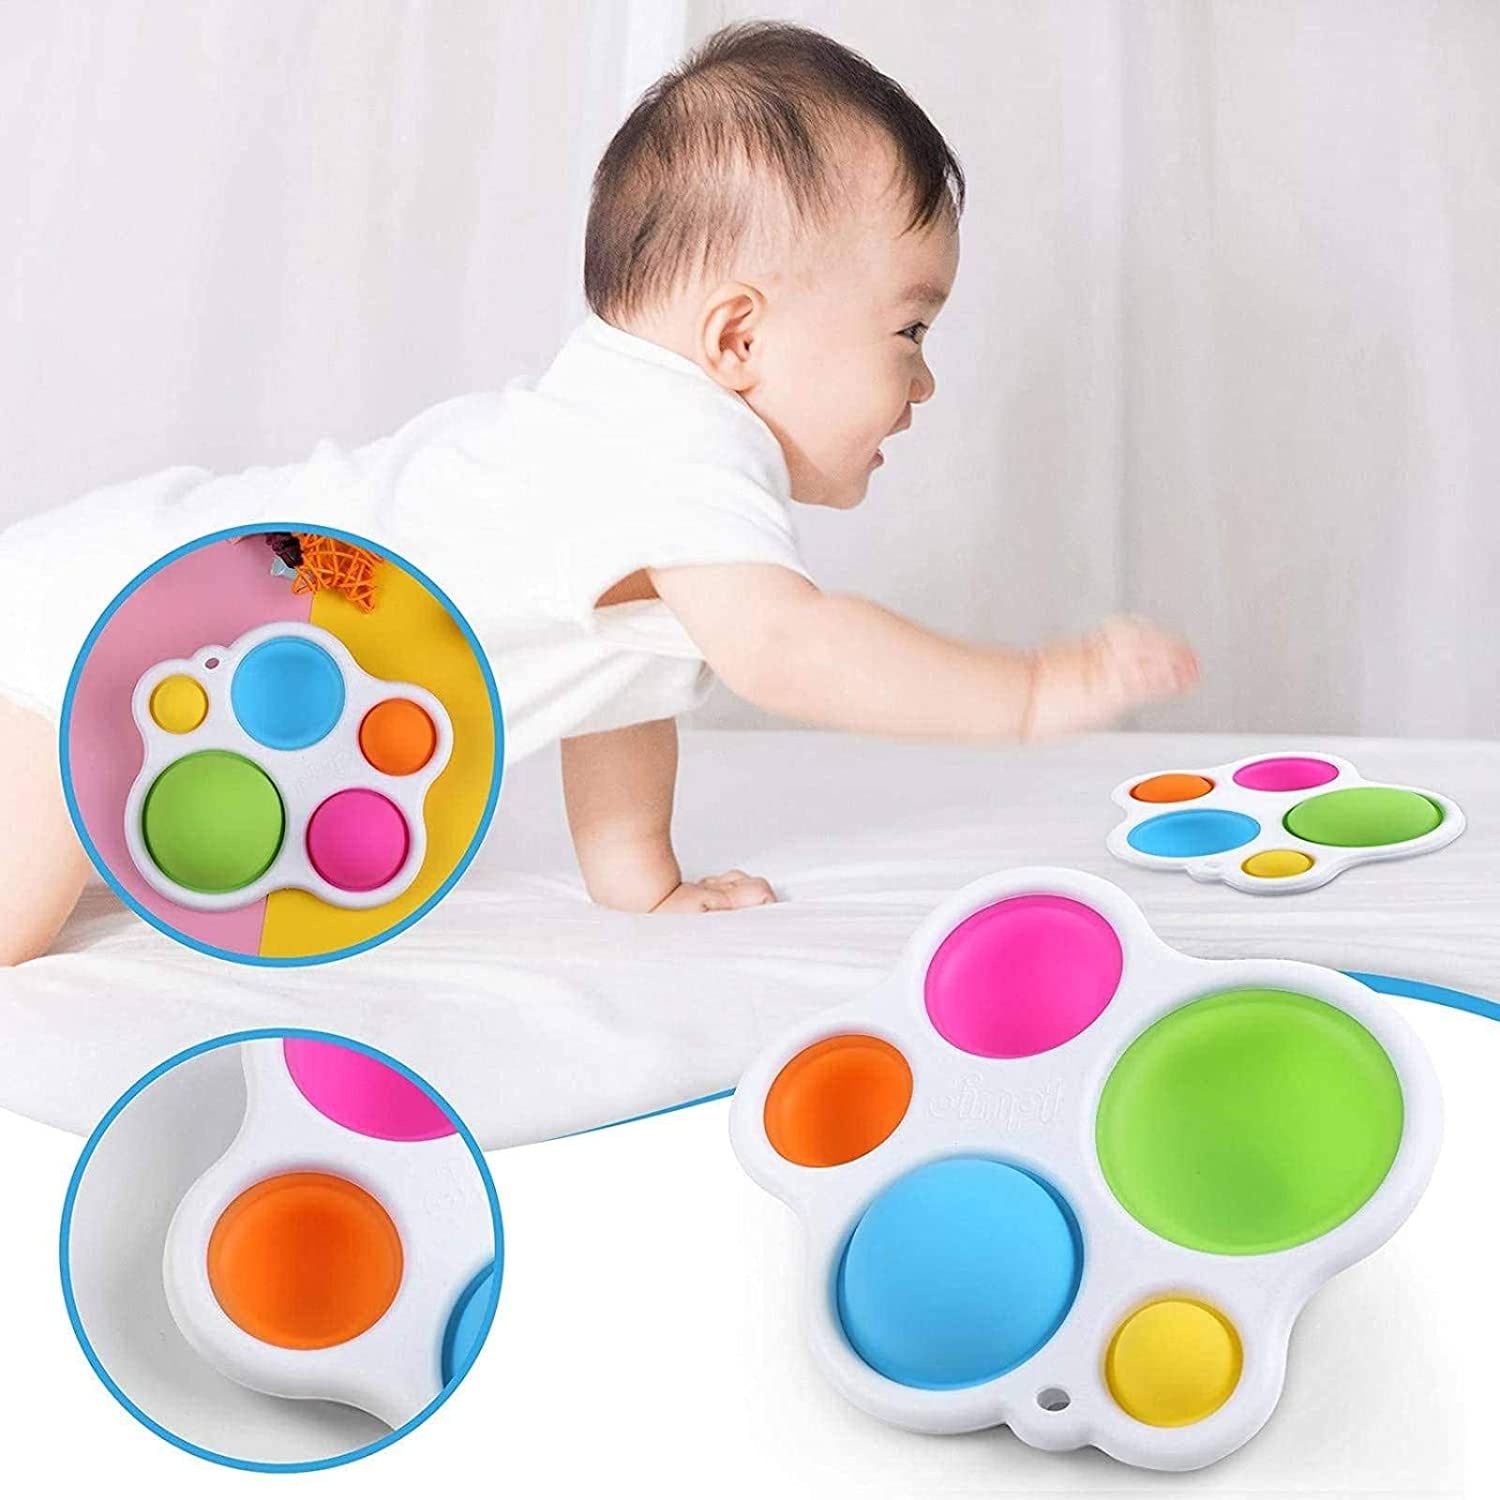 Fidget Simple Dimple Toys Stress Relief Hand Toys For Kids Adults Early Educational Enlightenment Intensive Autism Training